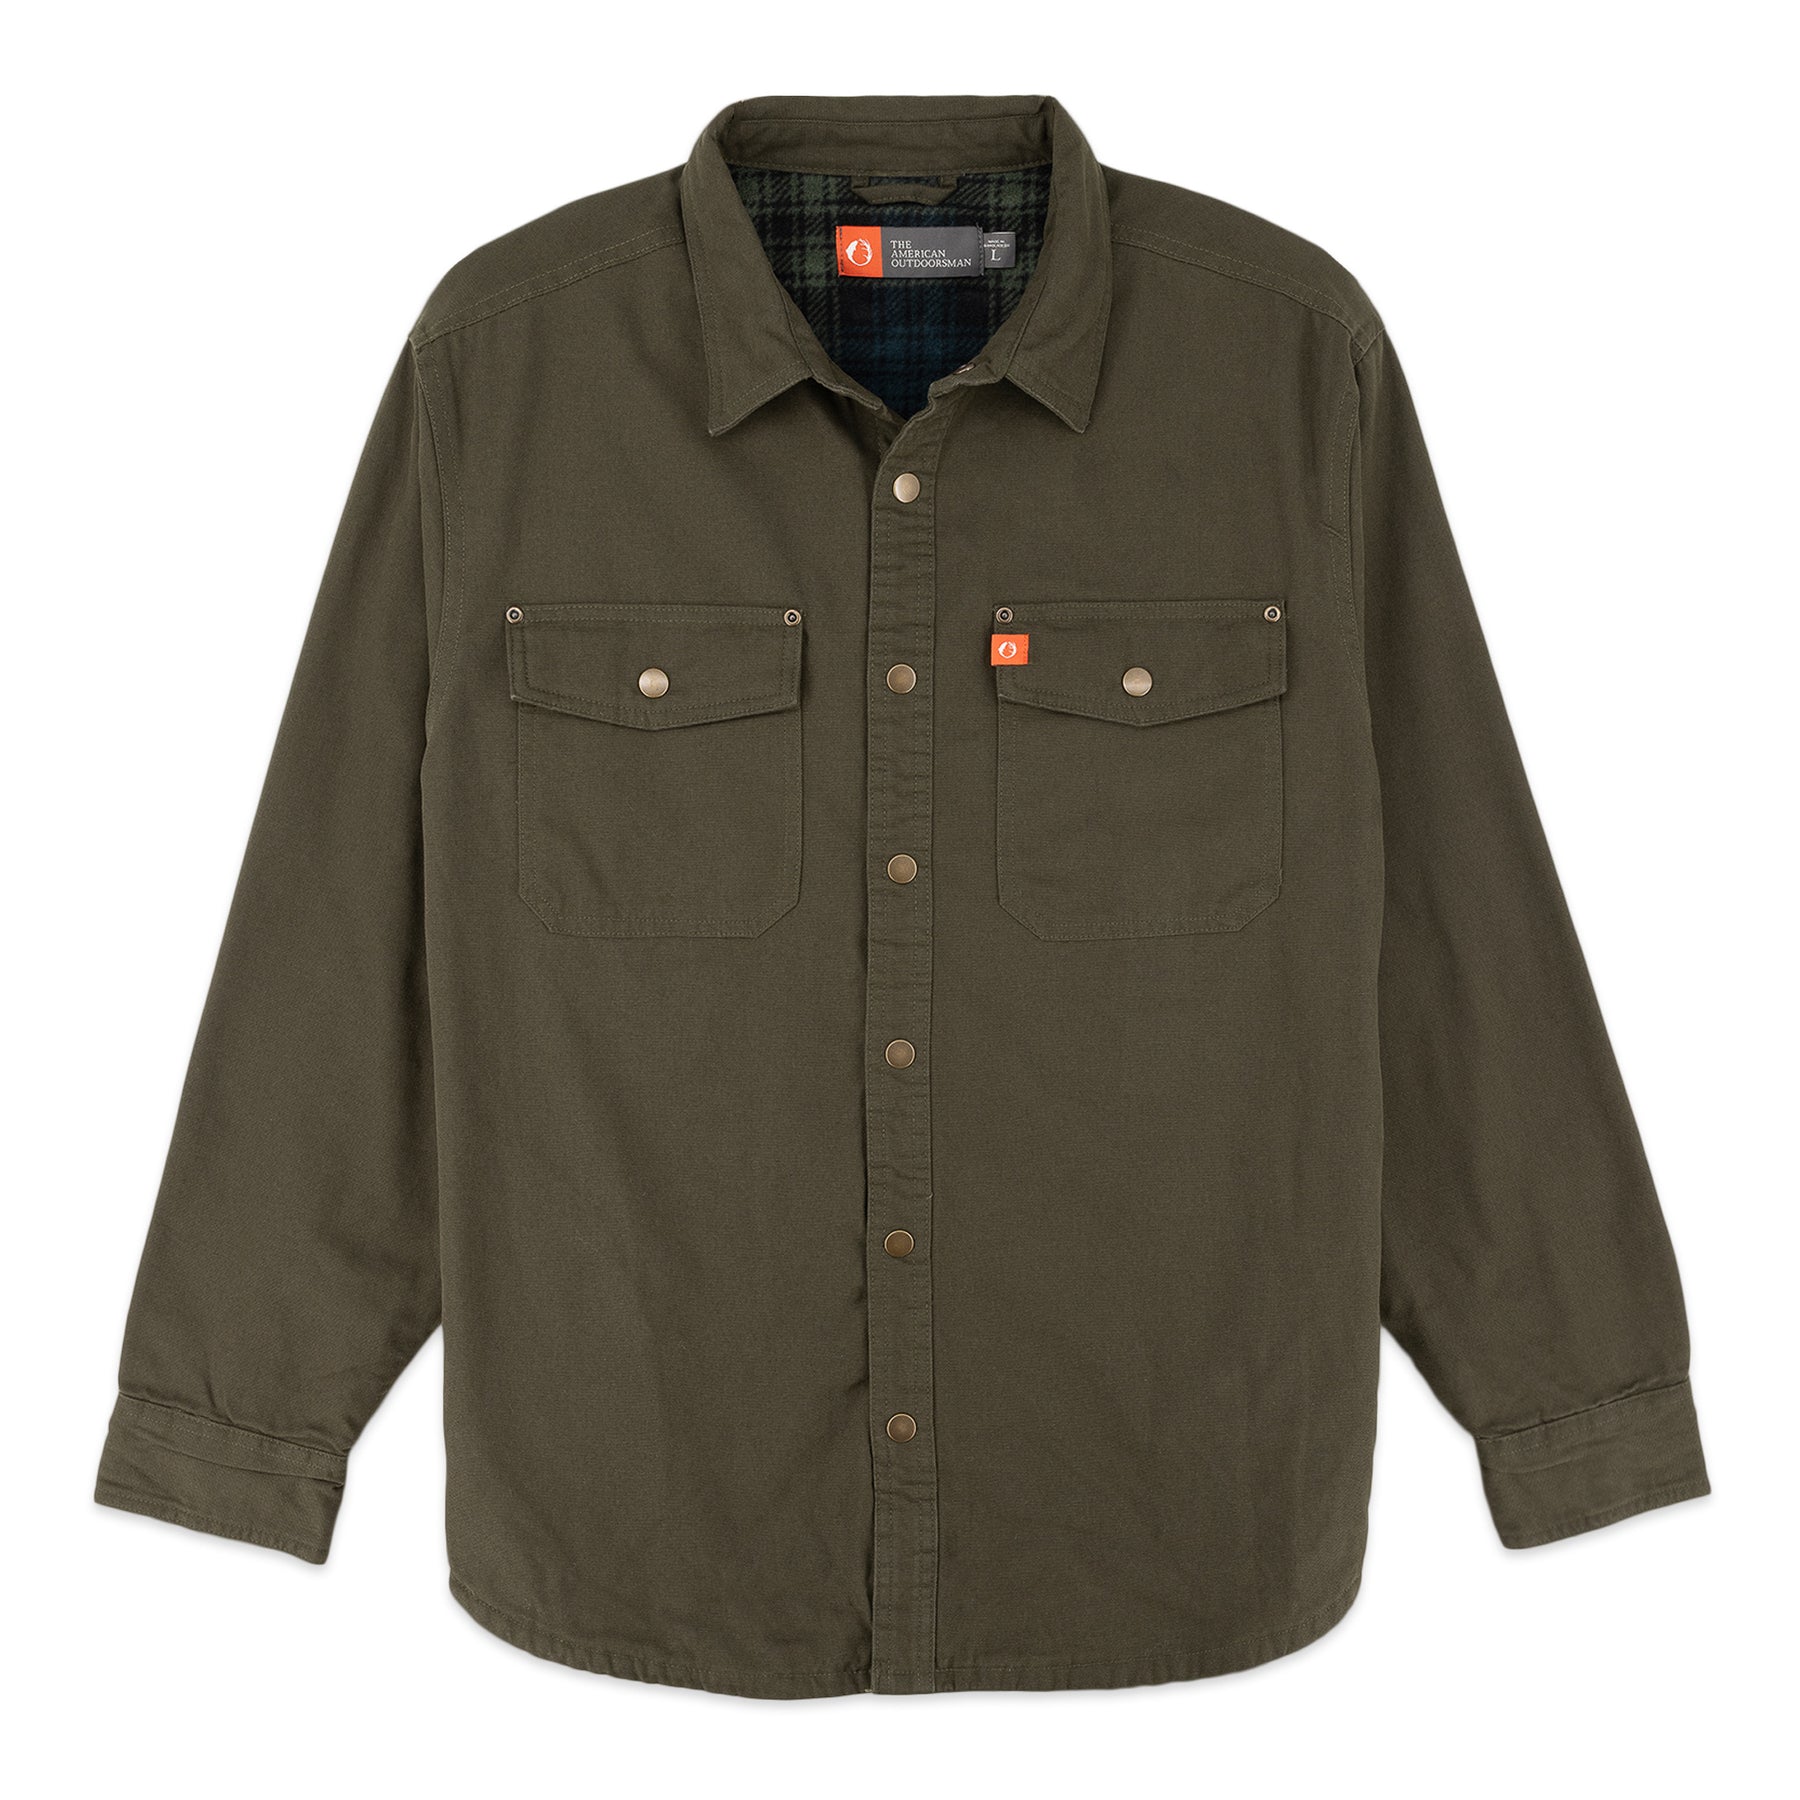 The American Outdoorsman Polar Fleece Lined Canvas Shirt Jacket for Men - Features Double Chest & Lined Hand Warmer Pockets